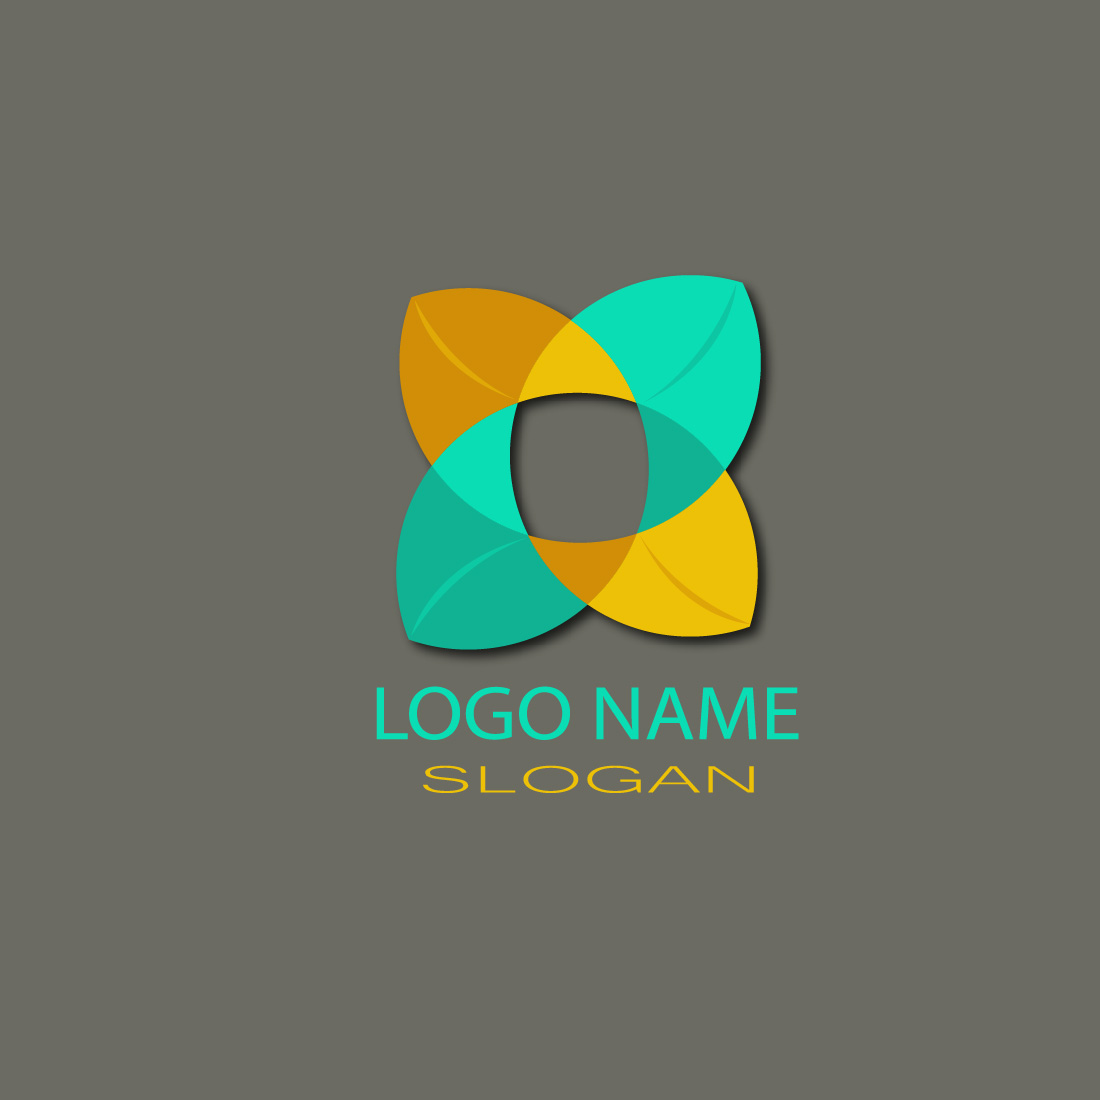 Great logo for your creative work.